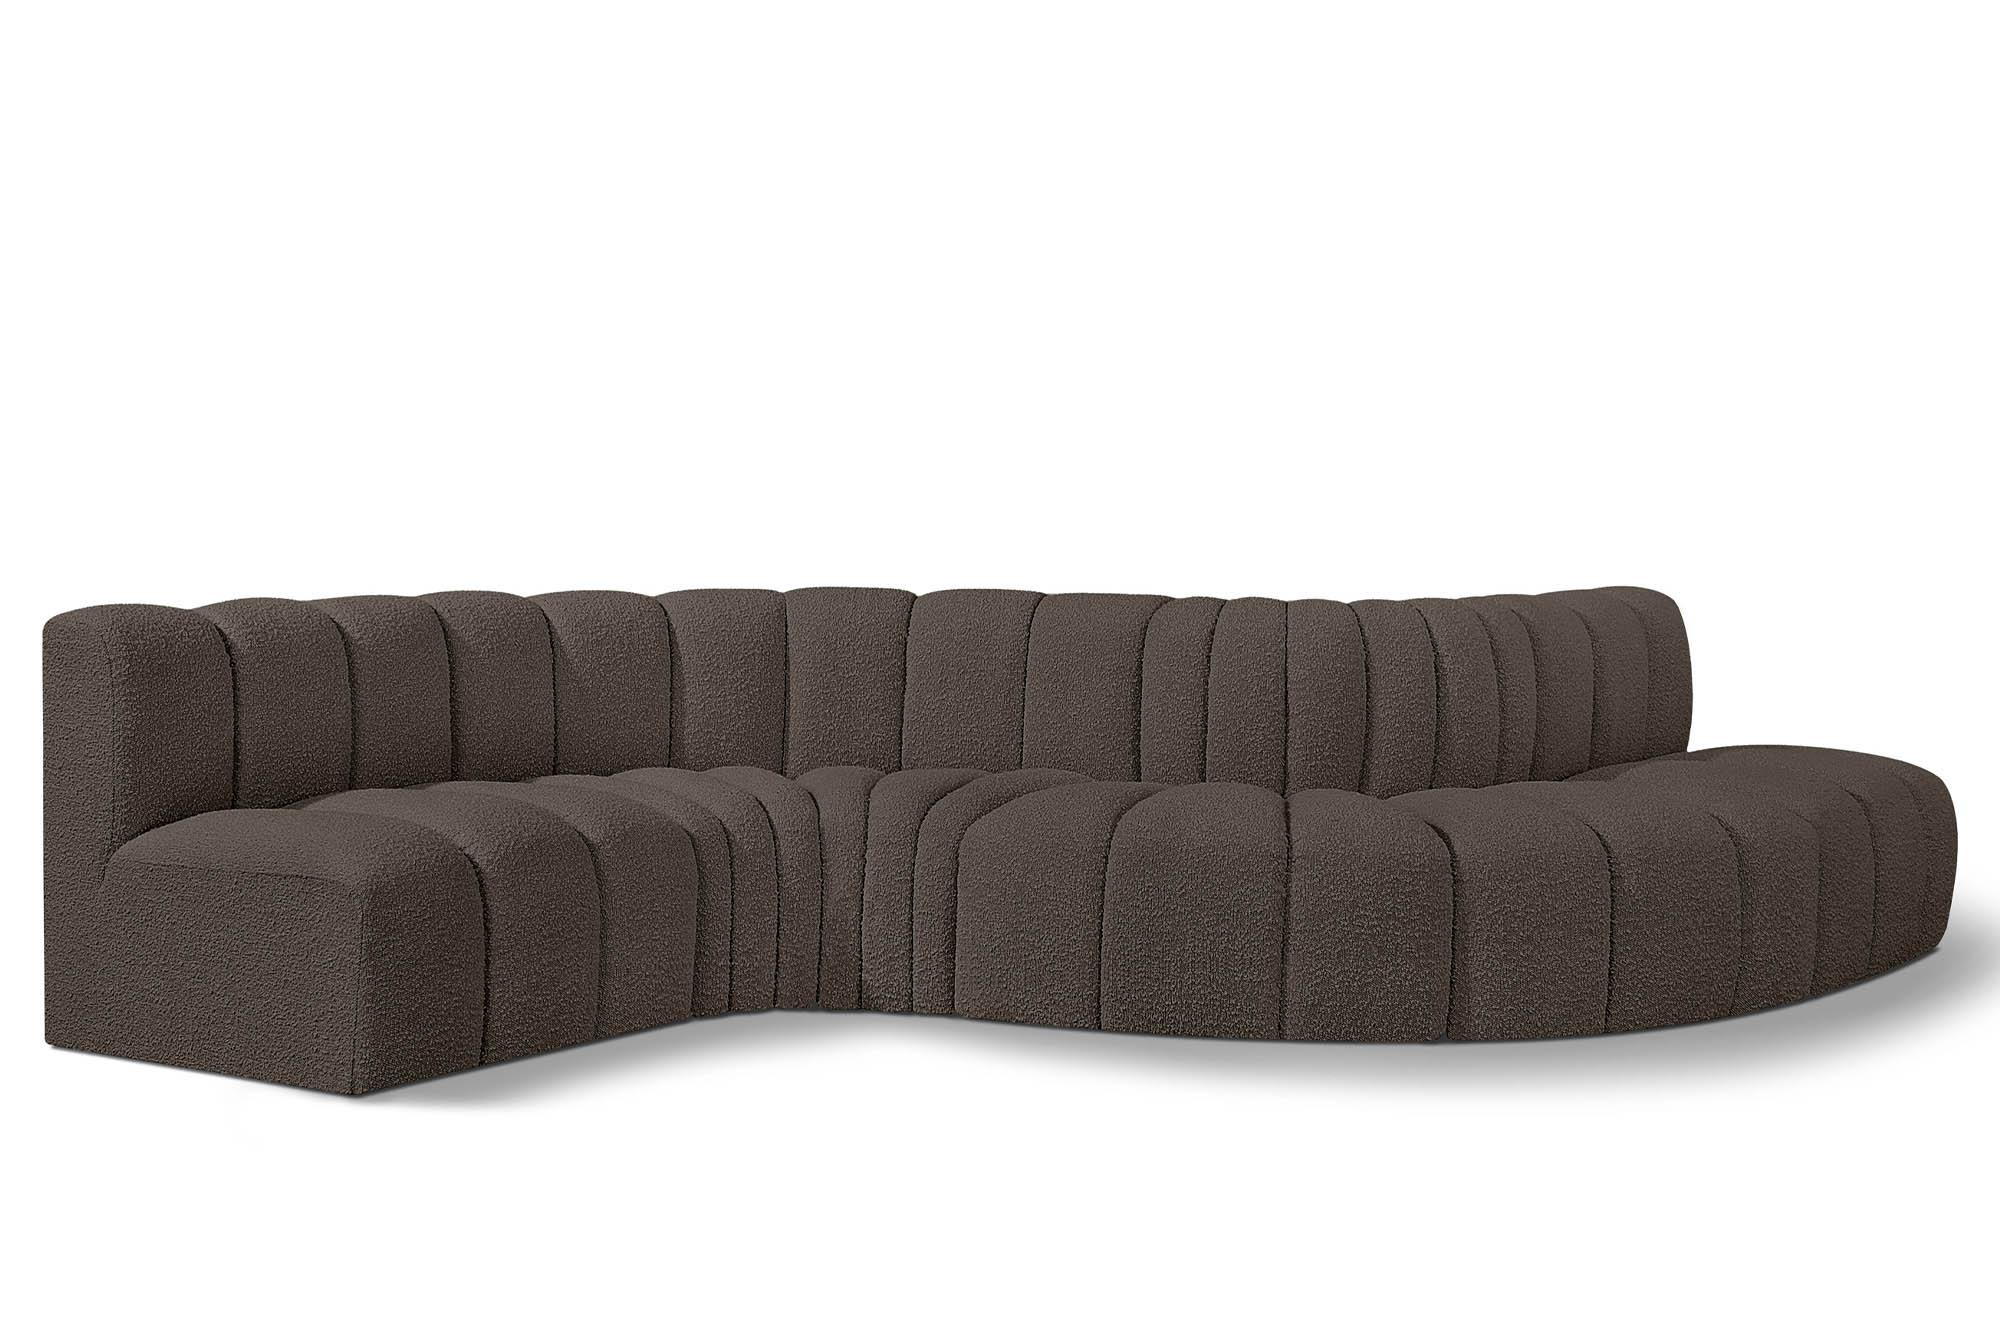 Contemporary, Modern Modular Sectional Sofa ARC 102Brown-S6A 102Brown-S6A in Brown 